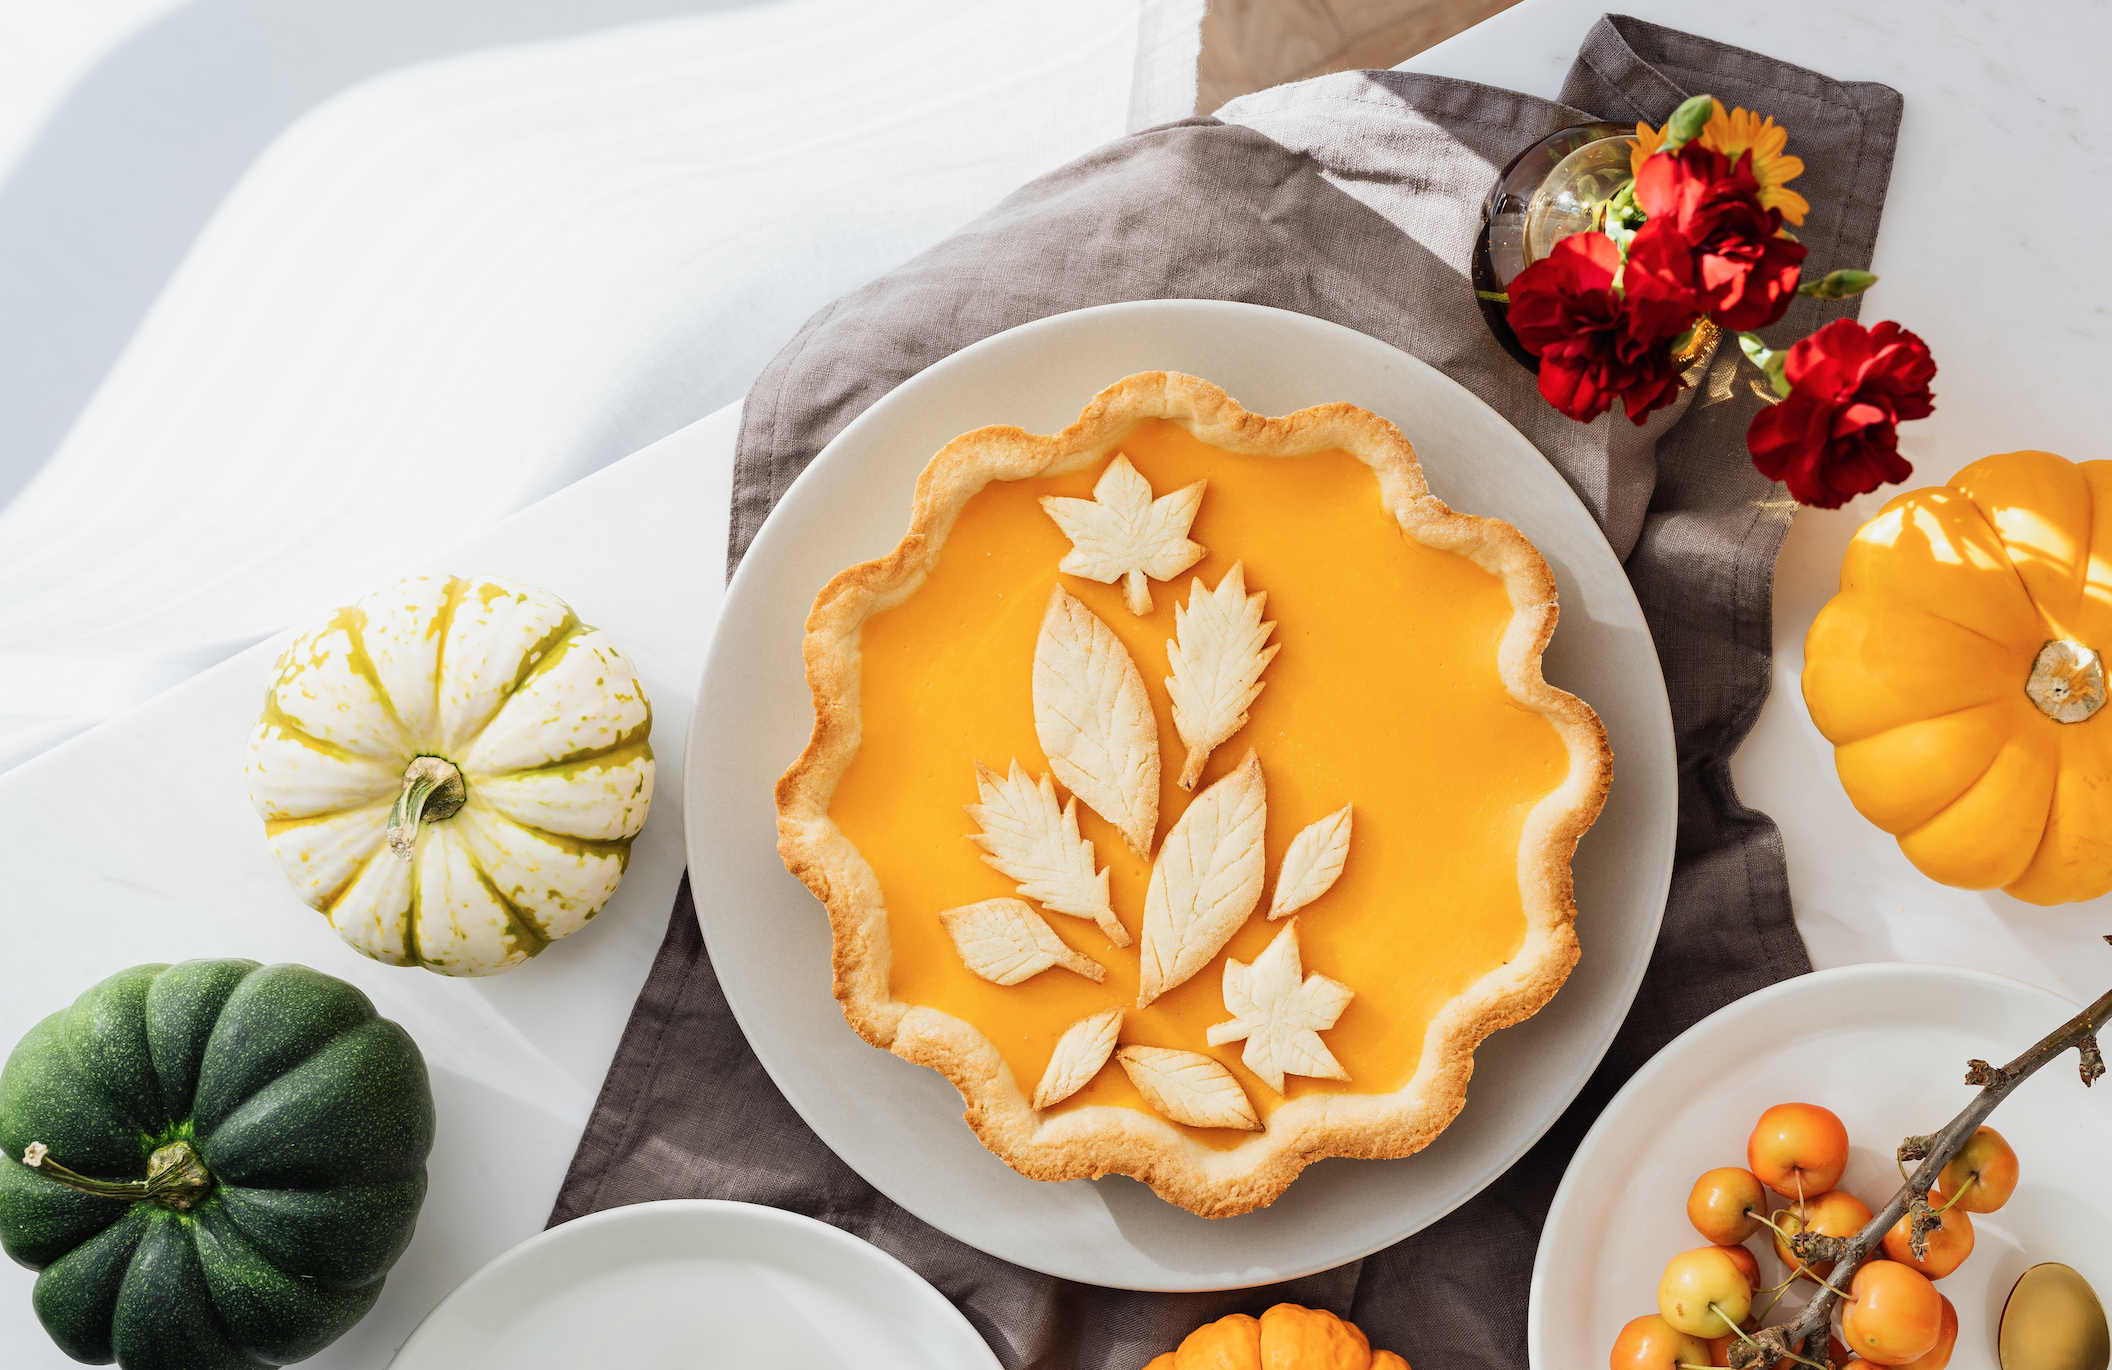 Thanksgiving Promotions: Best Methods to Run an Effective Advertorial Campaign